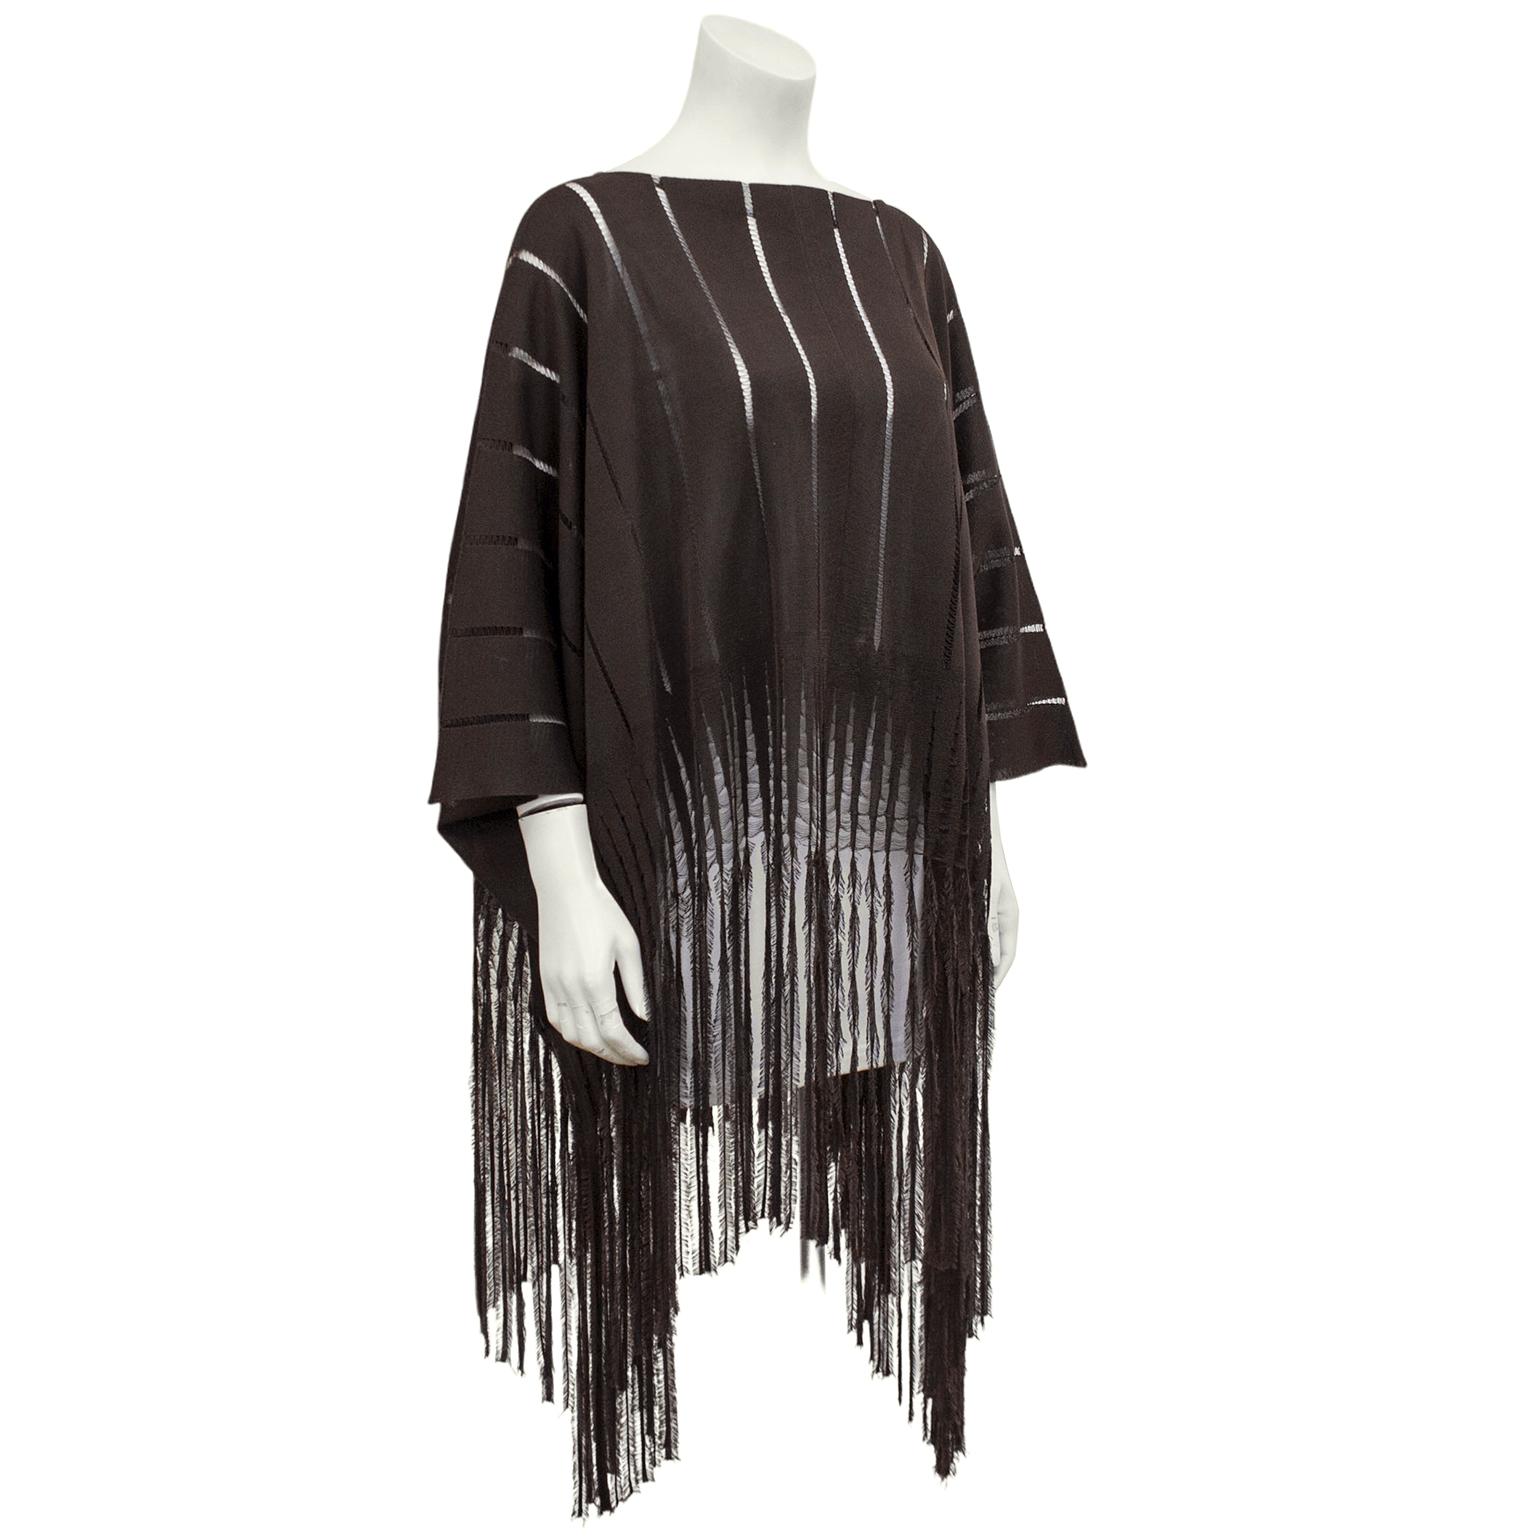 1970s Yves Saint Laurent bohemian brown poncho. Oversized, with a boat neckline, an wide knit, and a long fringe hem. Bracelet length dolman sleeves. Perfect over jeans and a t-shirt on a spring night for a boho chic look. In excellent vintage